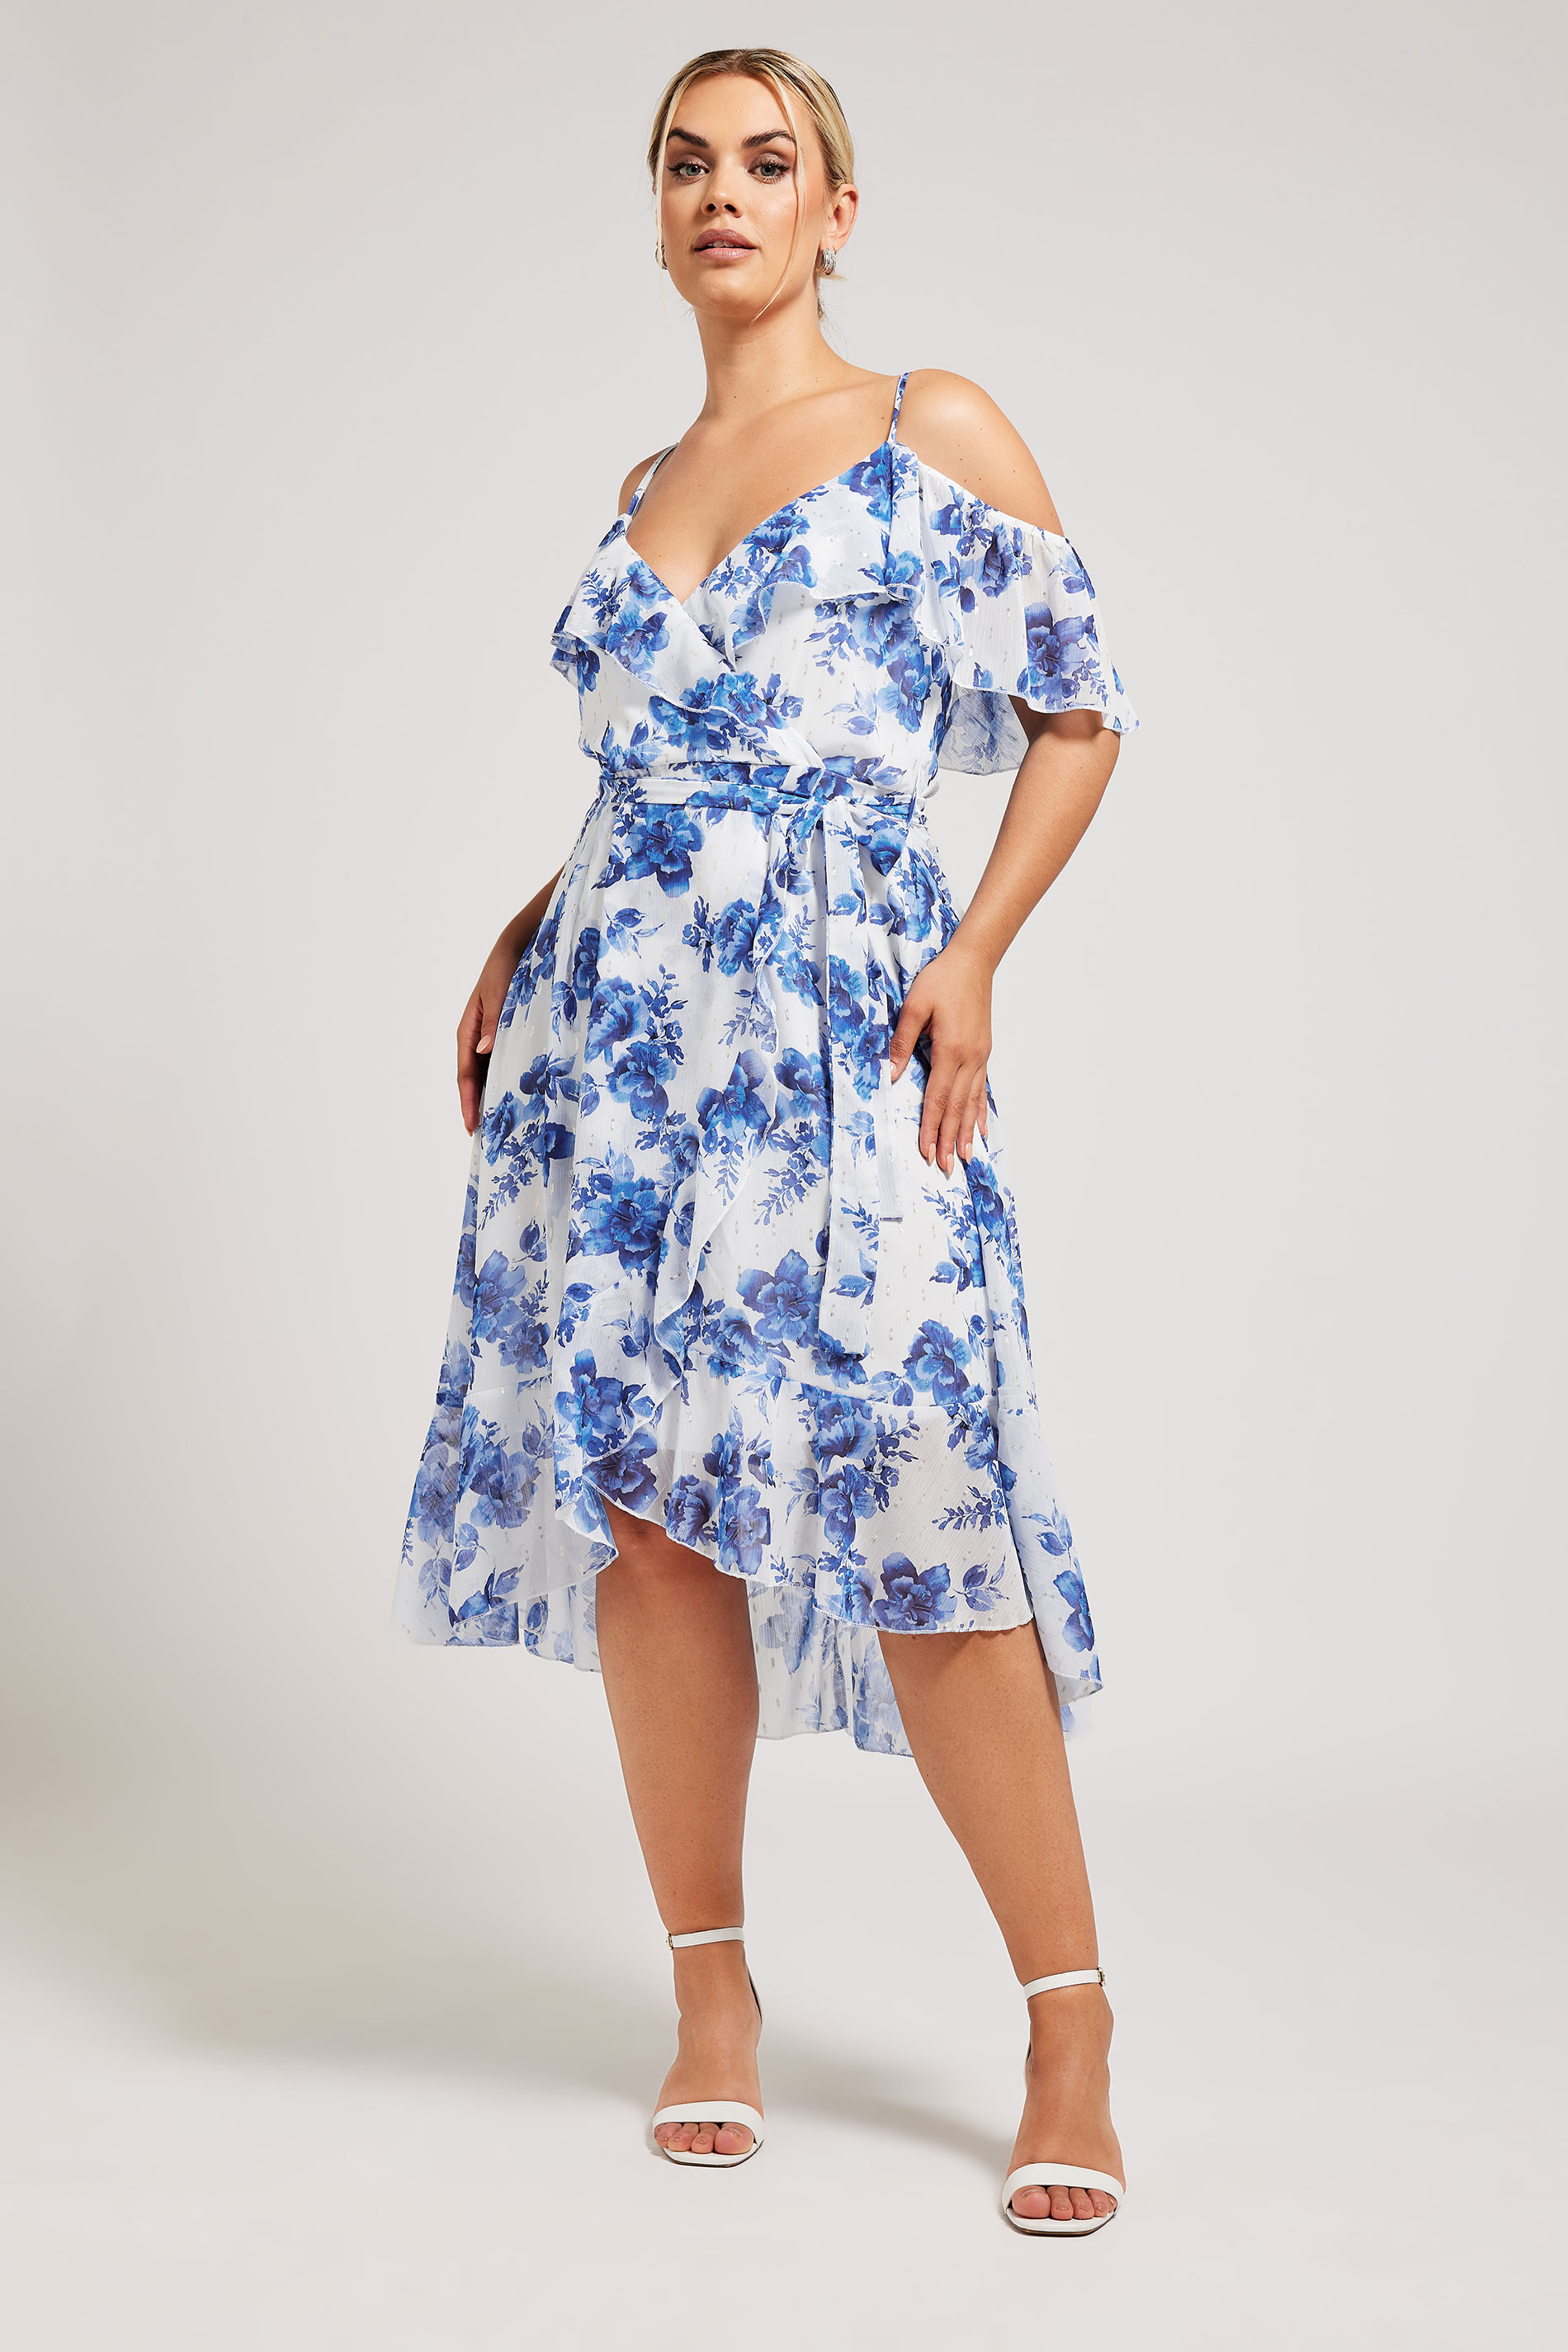 YOURS LONDON Plus Size White Floral Print Ruffle Hem Dress | Yours Clothing 1